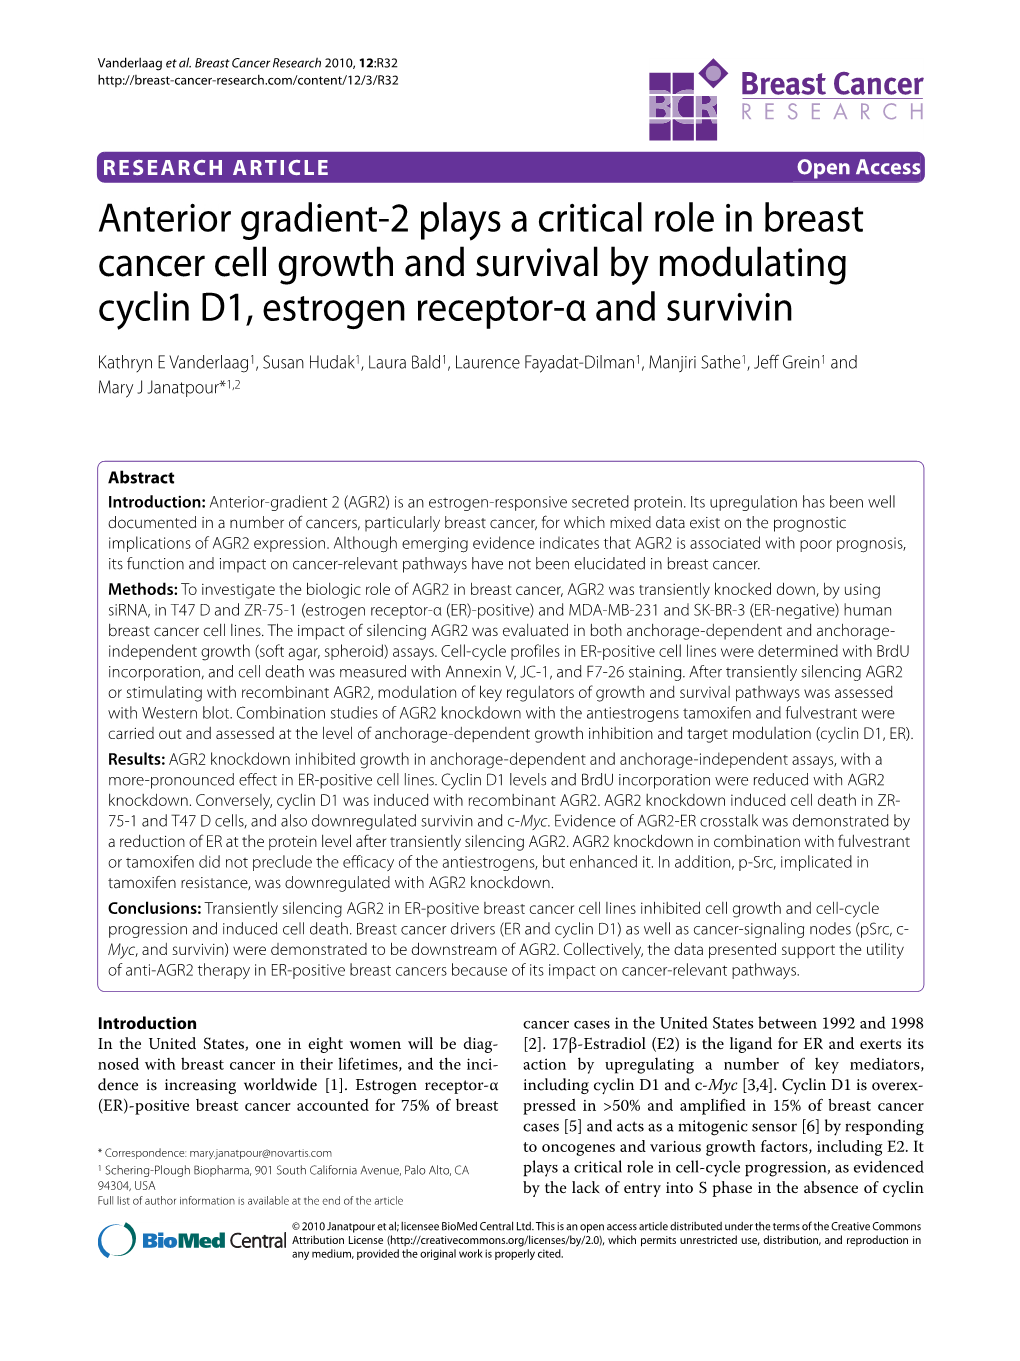 Anterior Gradient-2 Plays a Critical Role in Breast Cancer Cell Growth And